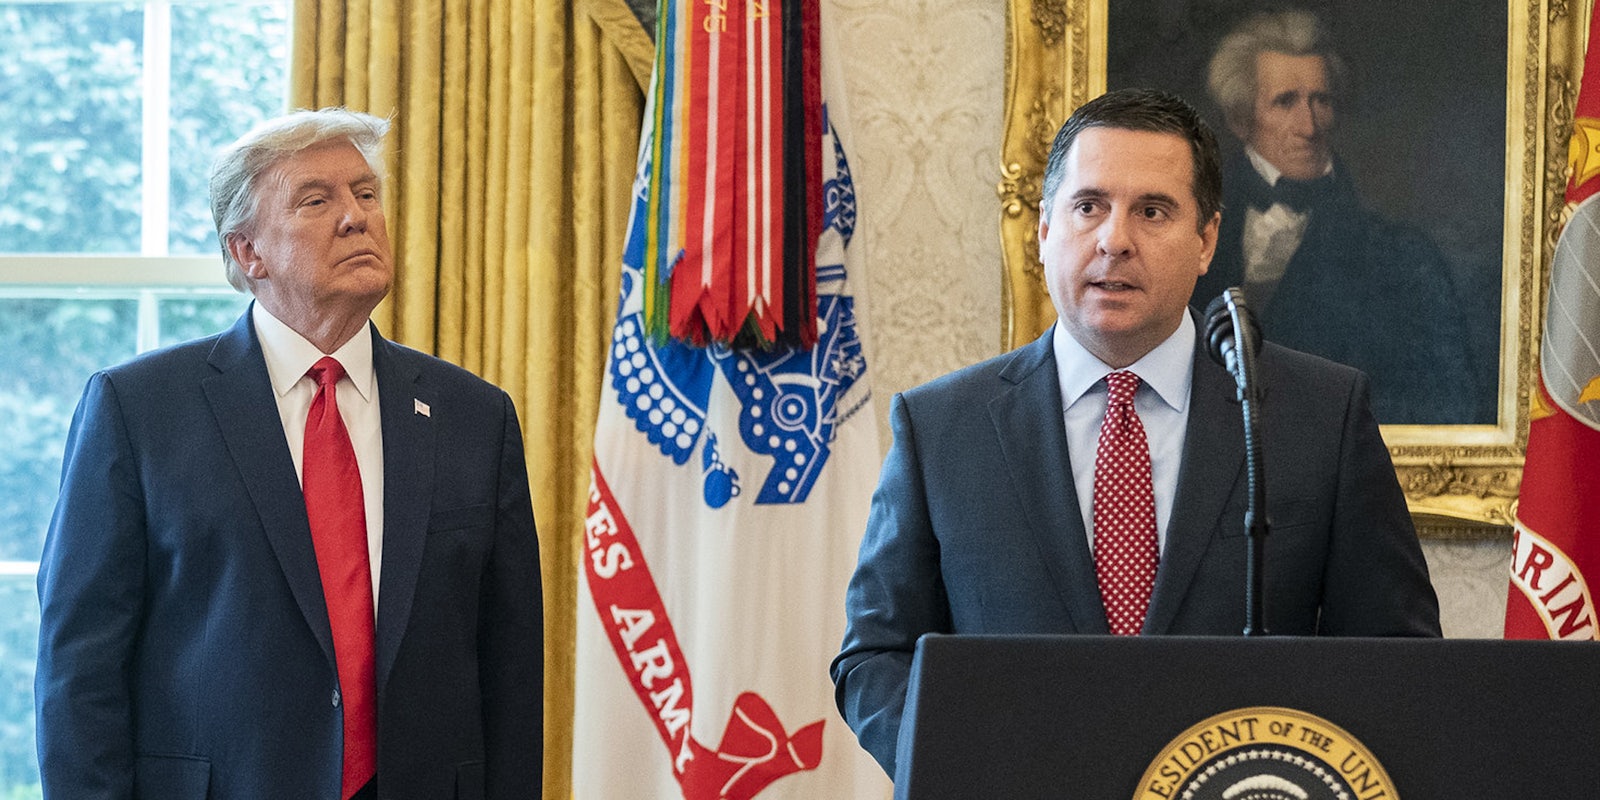 Devin Nunes speaking at a podium at the White House. Former President Donald Trump stands behind him.